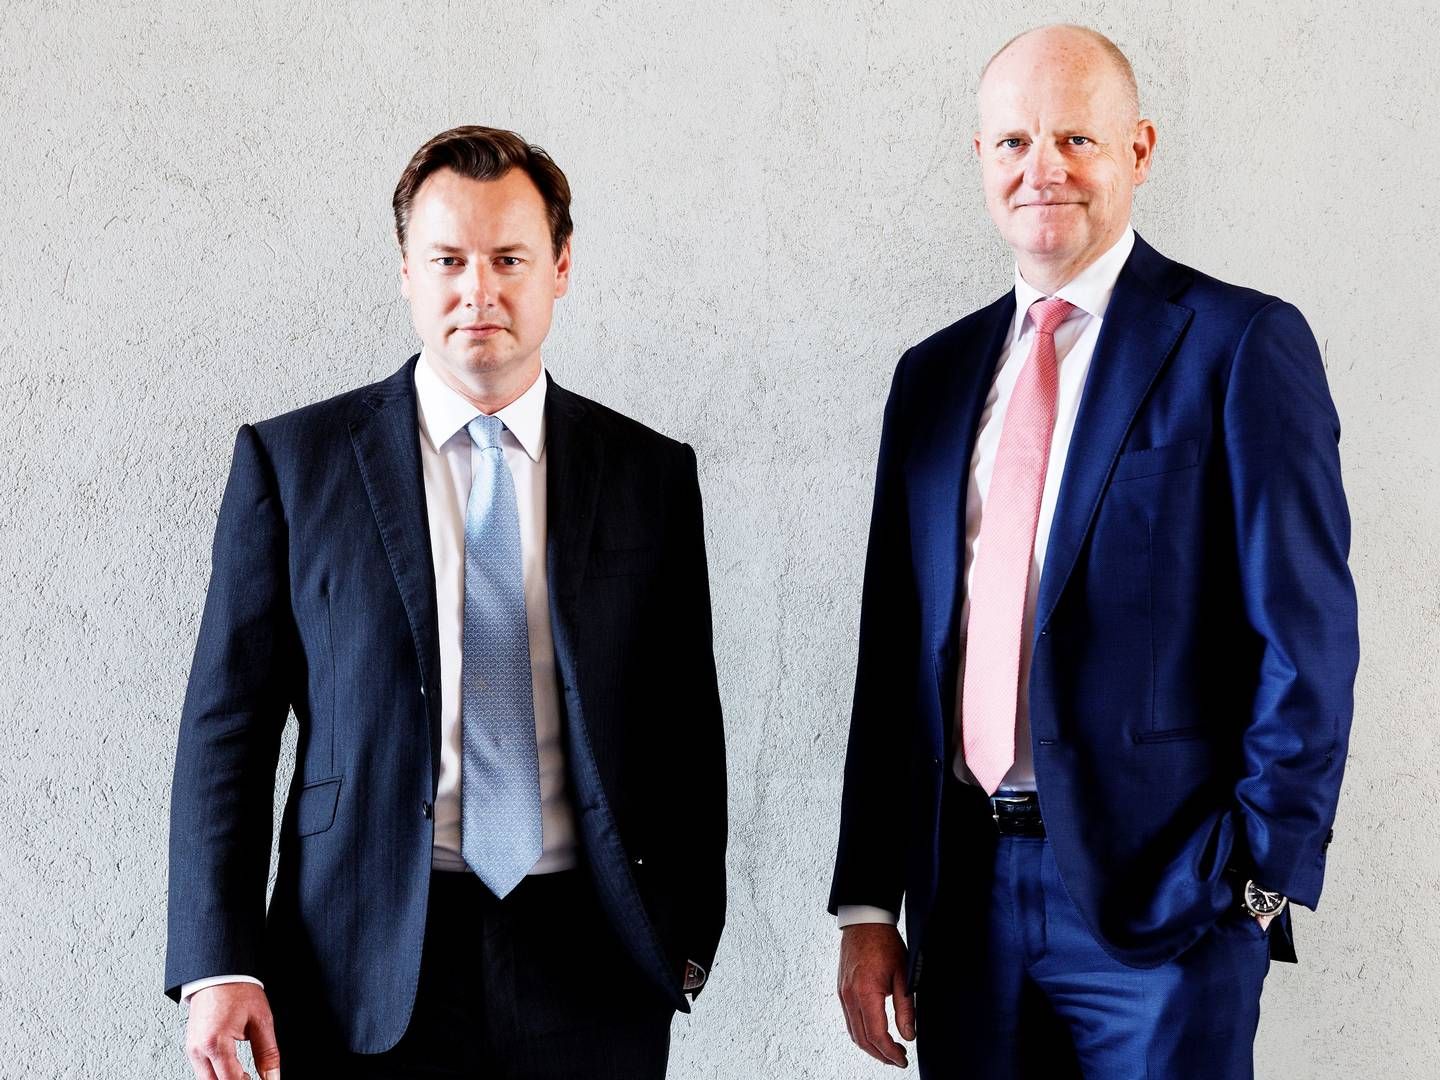 Freddie Lee (left) and Carsten Mortensen, both partners in Dee4 Capital Partners, together with Reefer RoRo AG, will build a green reefer vessel for banana export to Europe. | Photo: Pr-foto